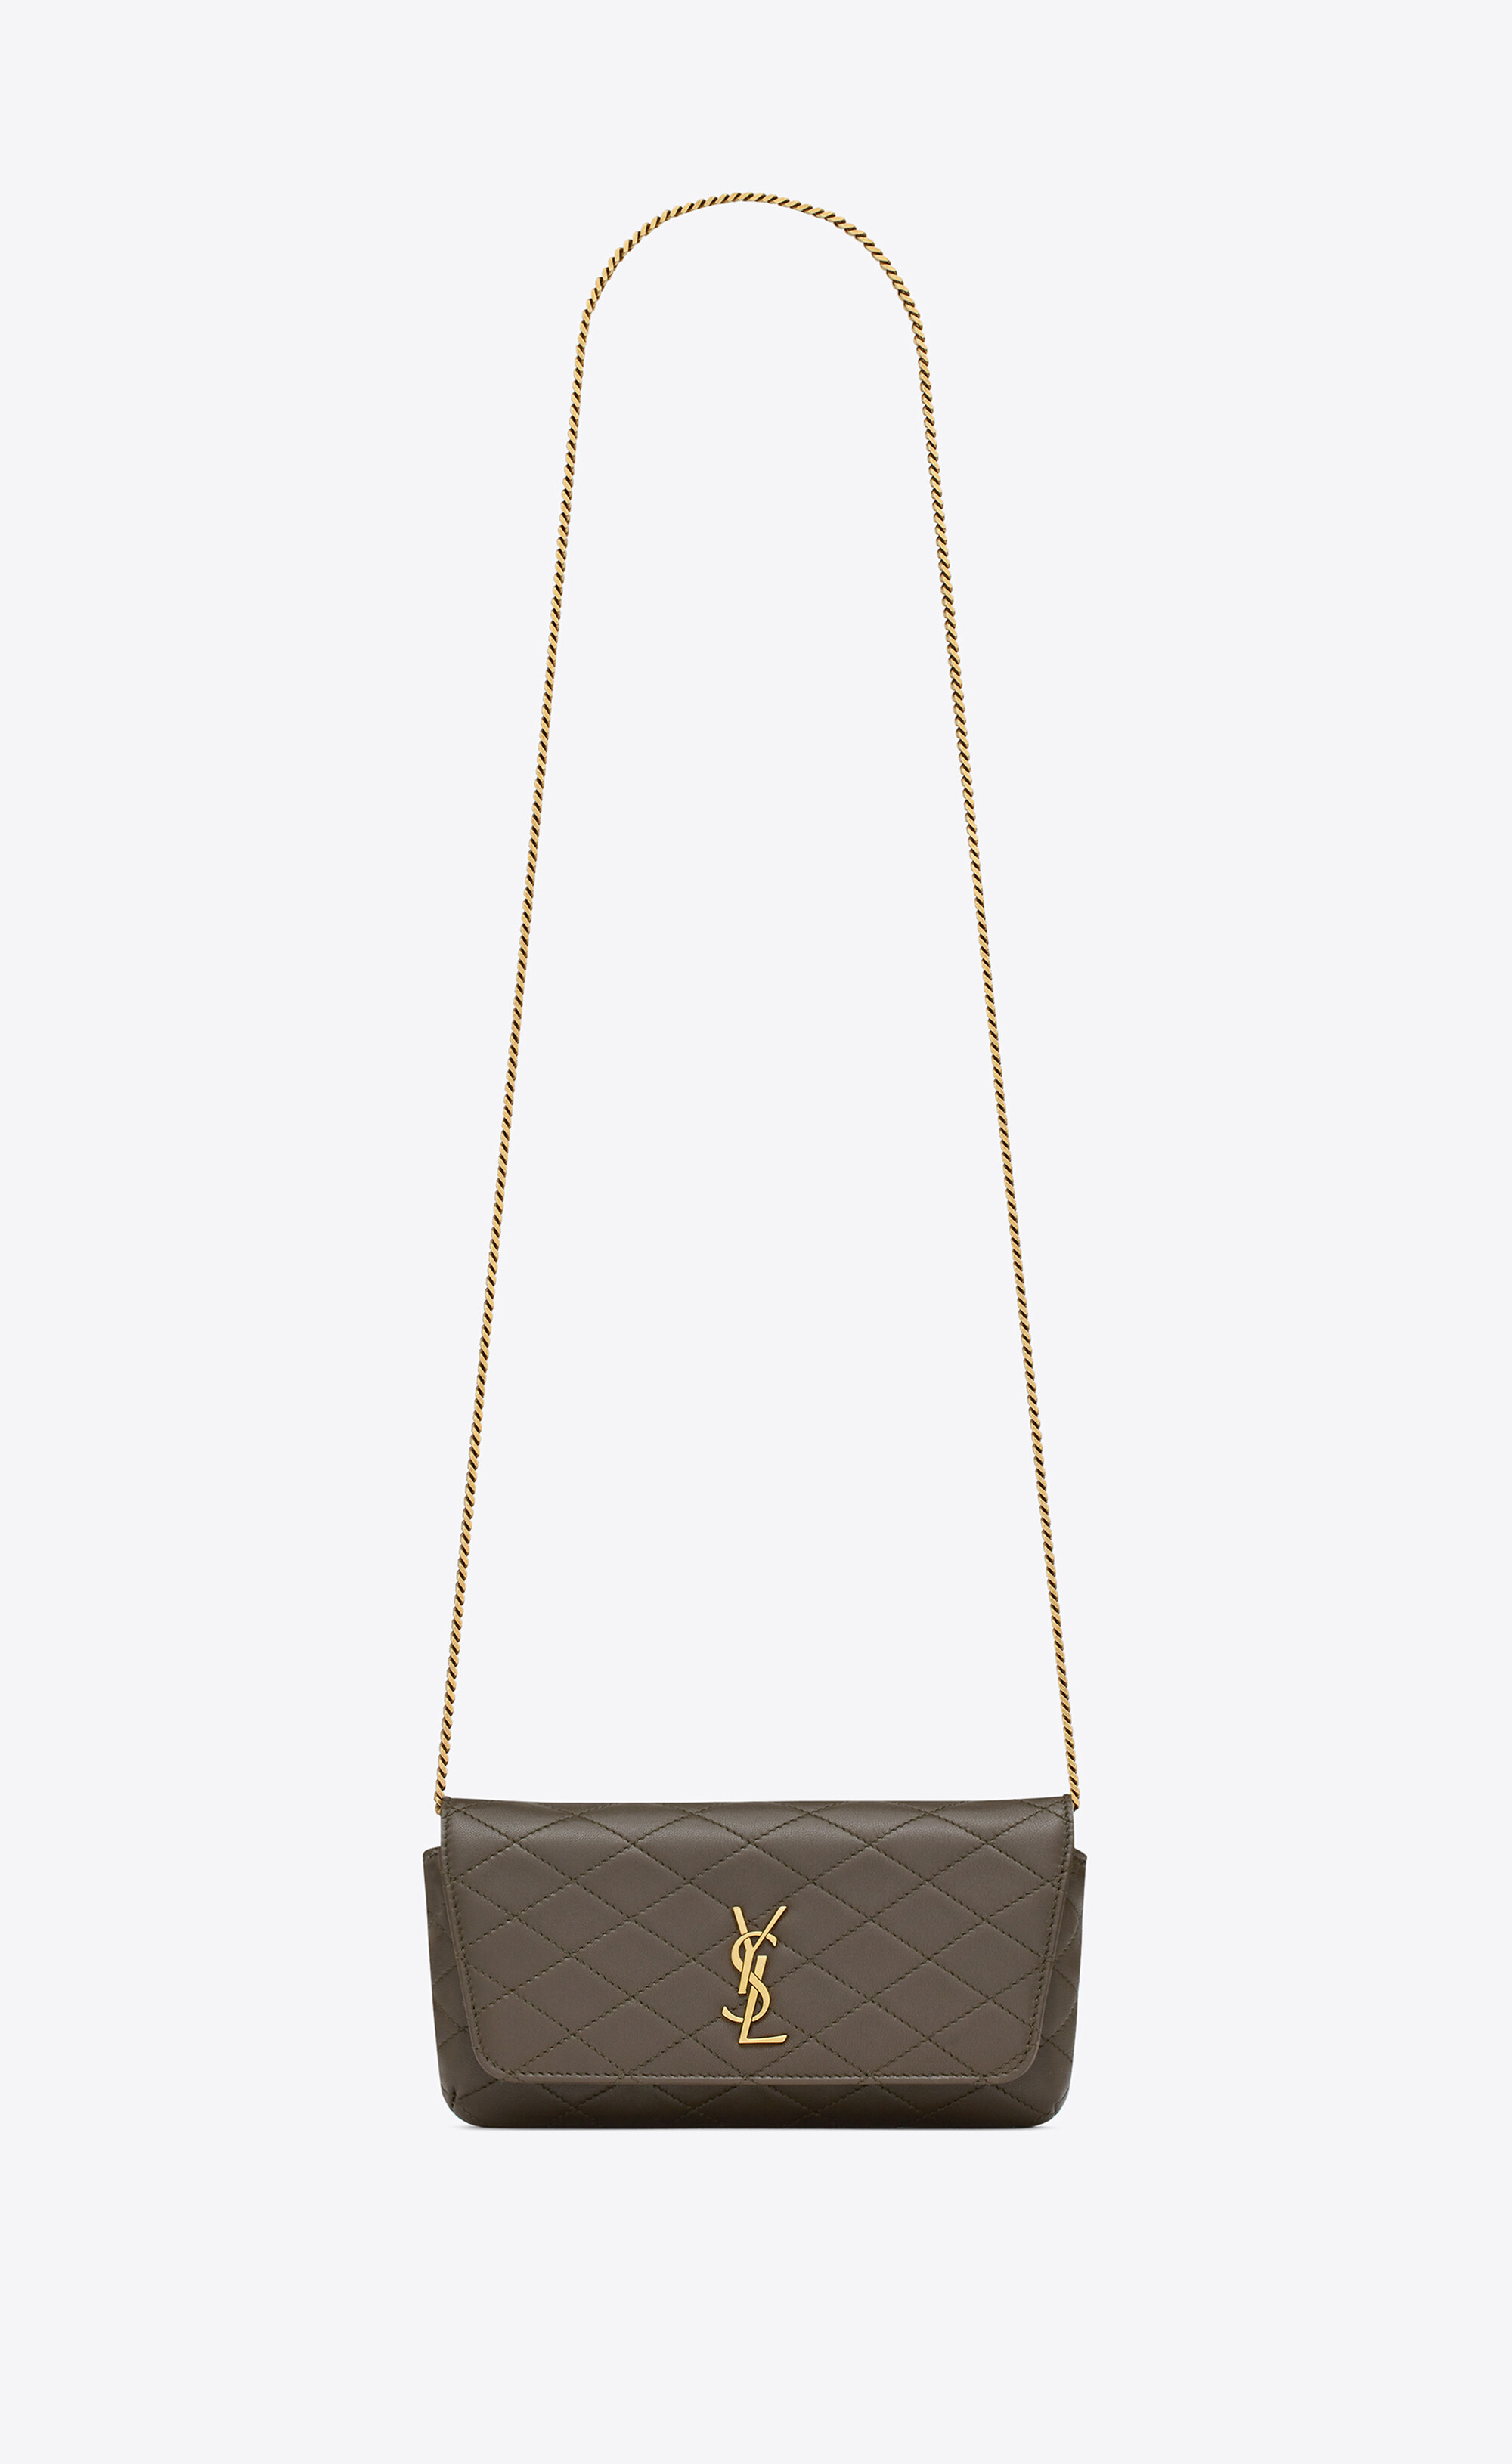 GABY chain phone holder in quilted lambskin | Saint Laurent | YSL.com